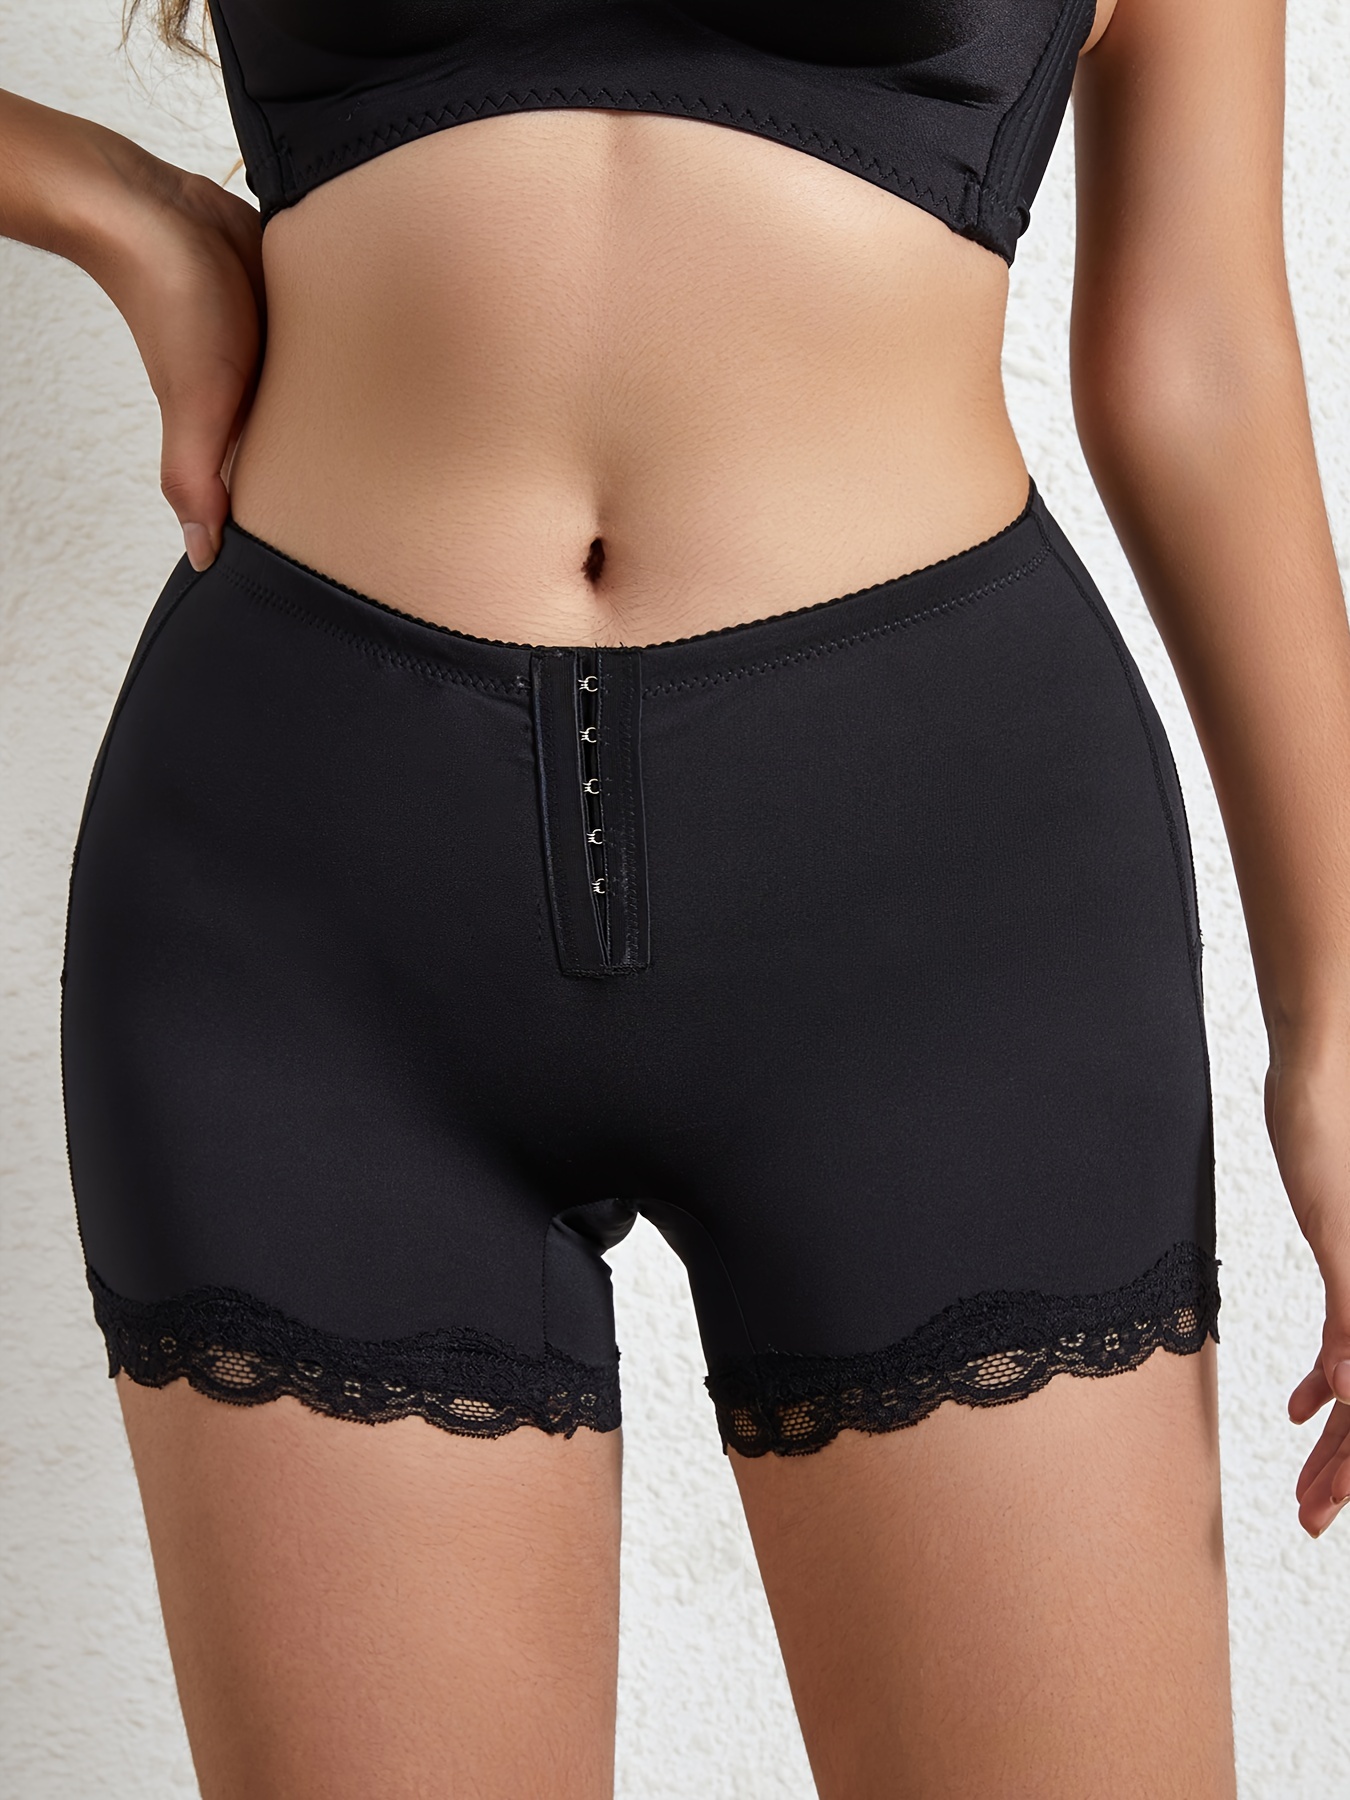 Butt Lifter Panties Plus Size Buttock Open Booty Shorts Tummy